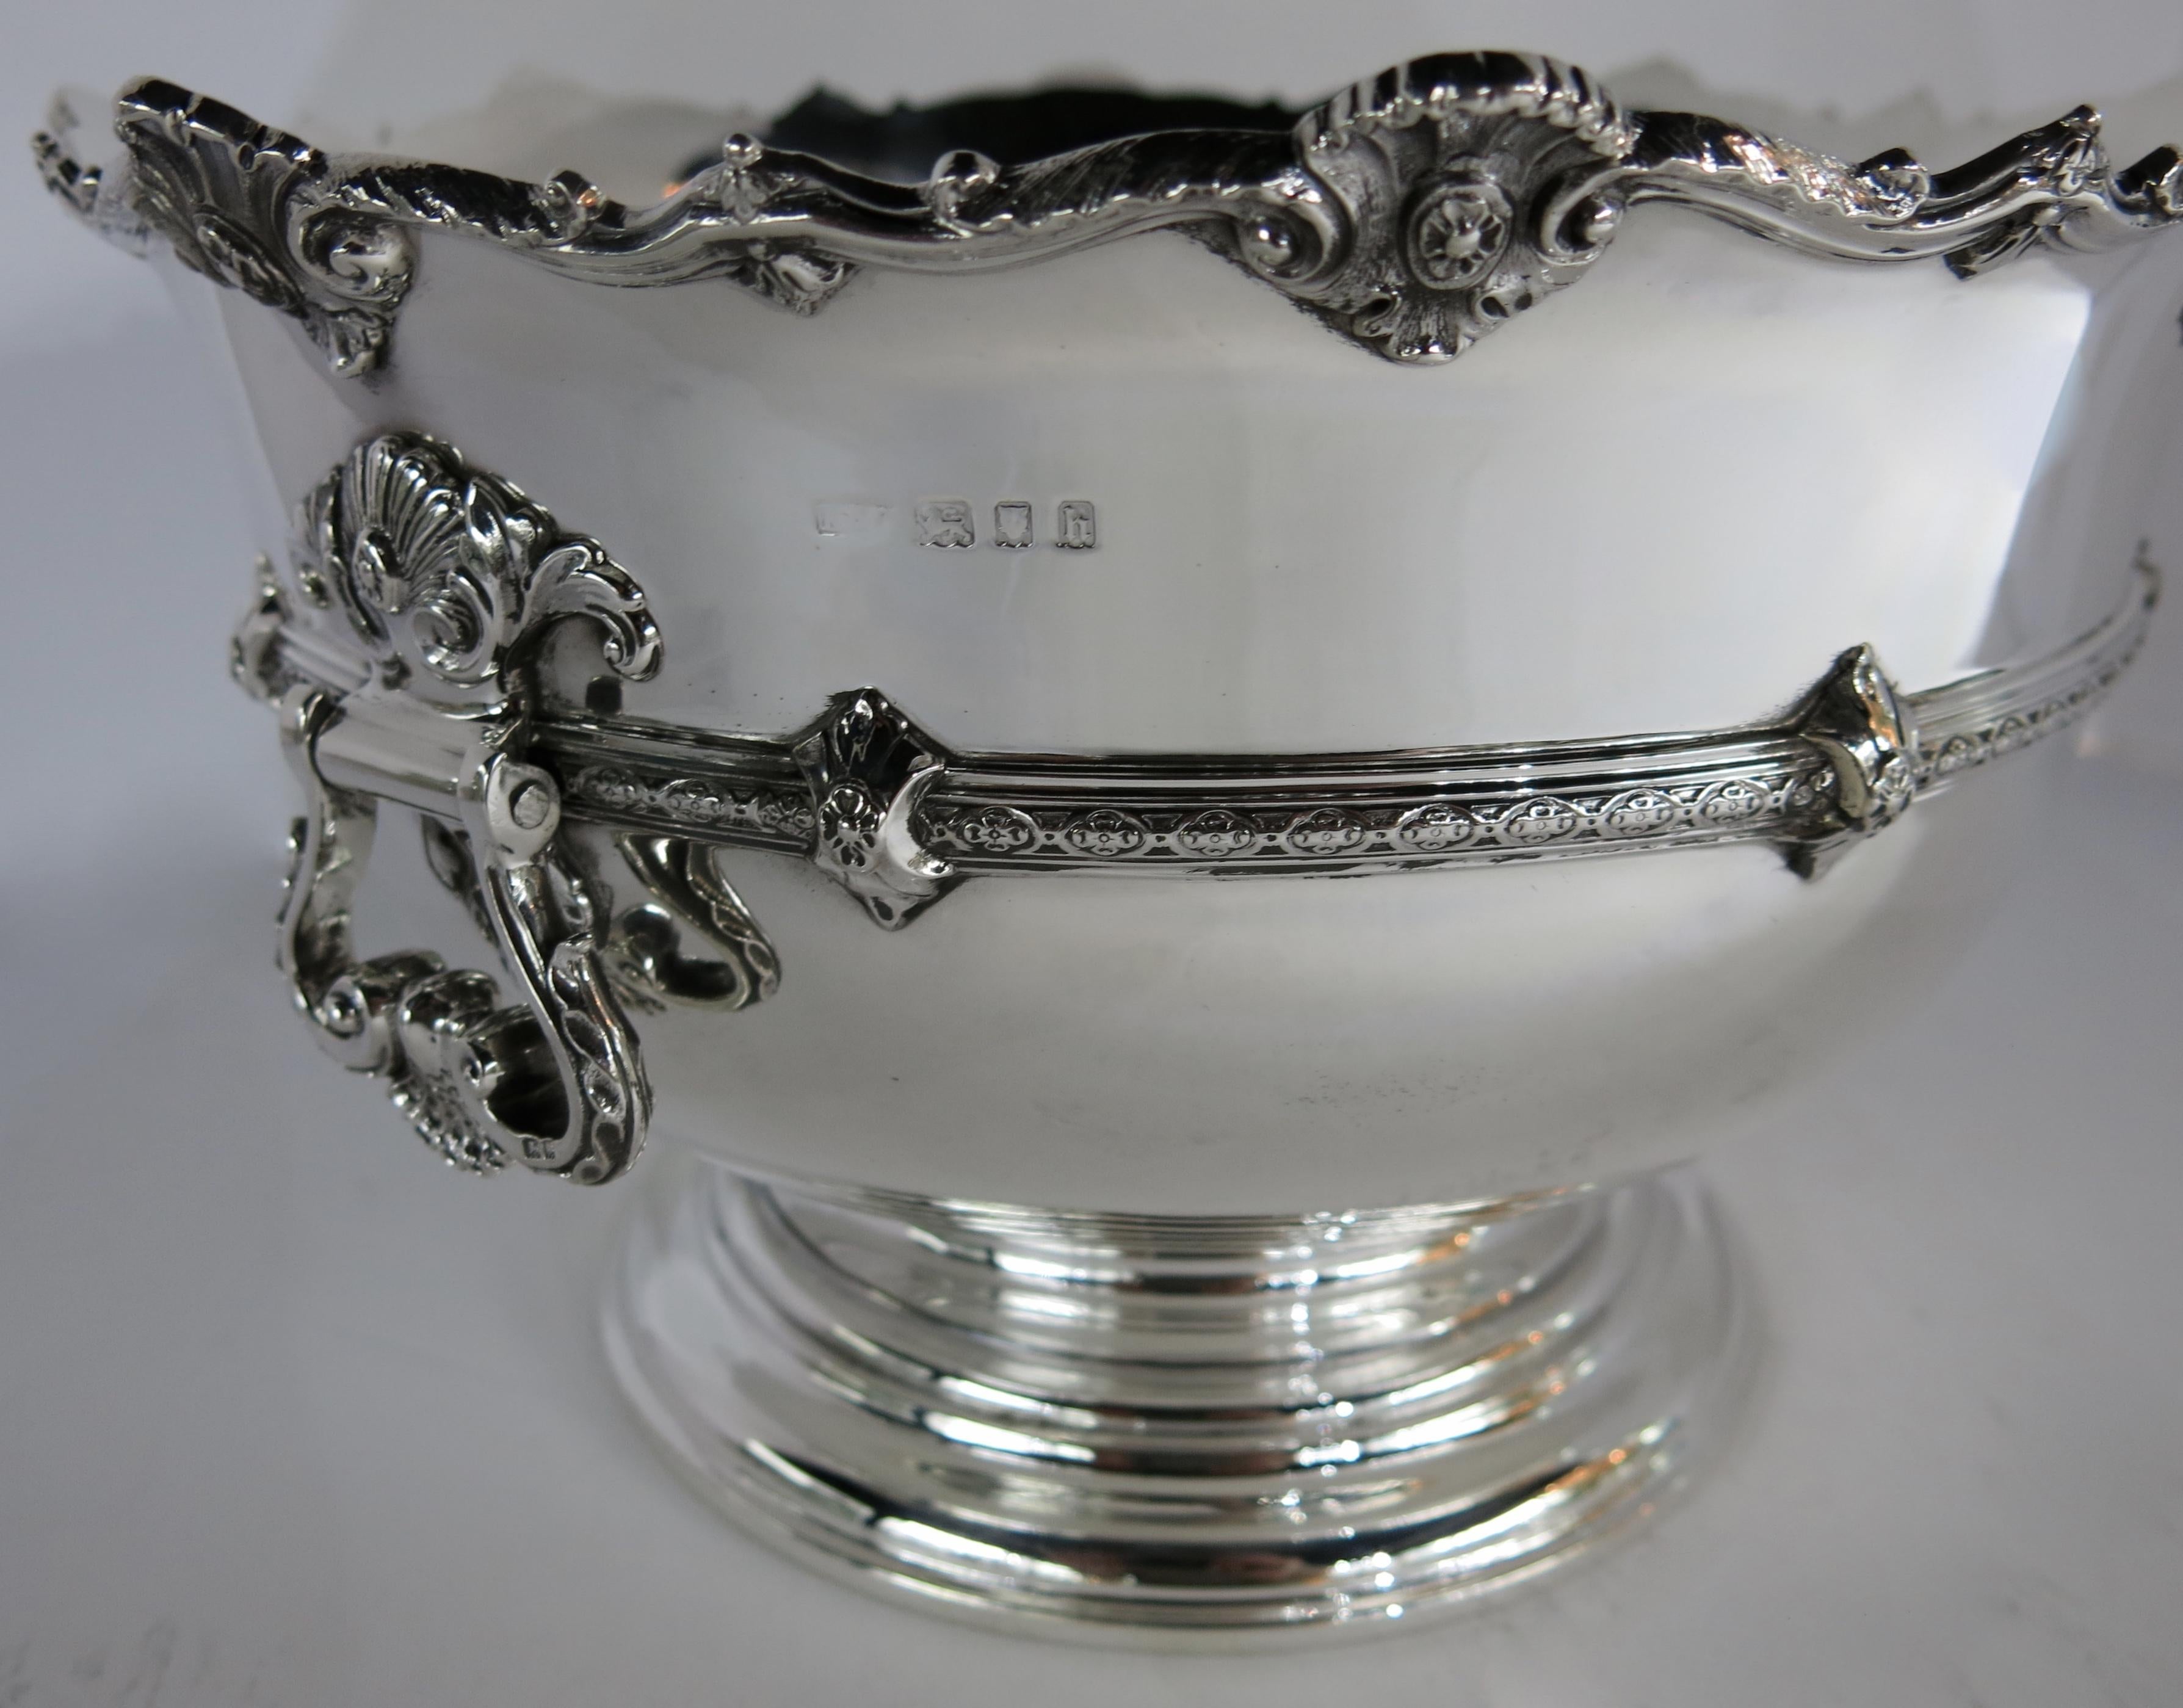 English, sterling silver Paul de Lamerie style round bowl made by l.A. Crichton silversmith, London, 1923. The round bowl with a diameter of 10 3/4